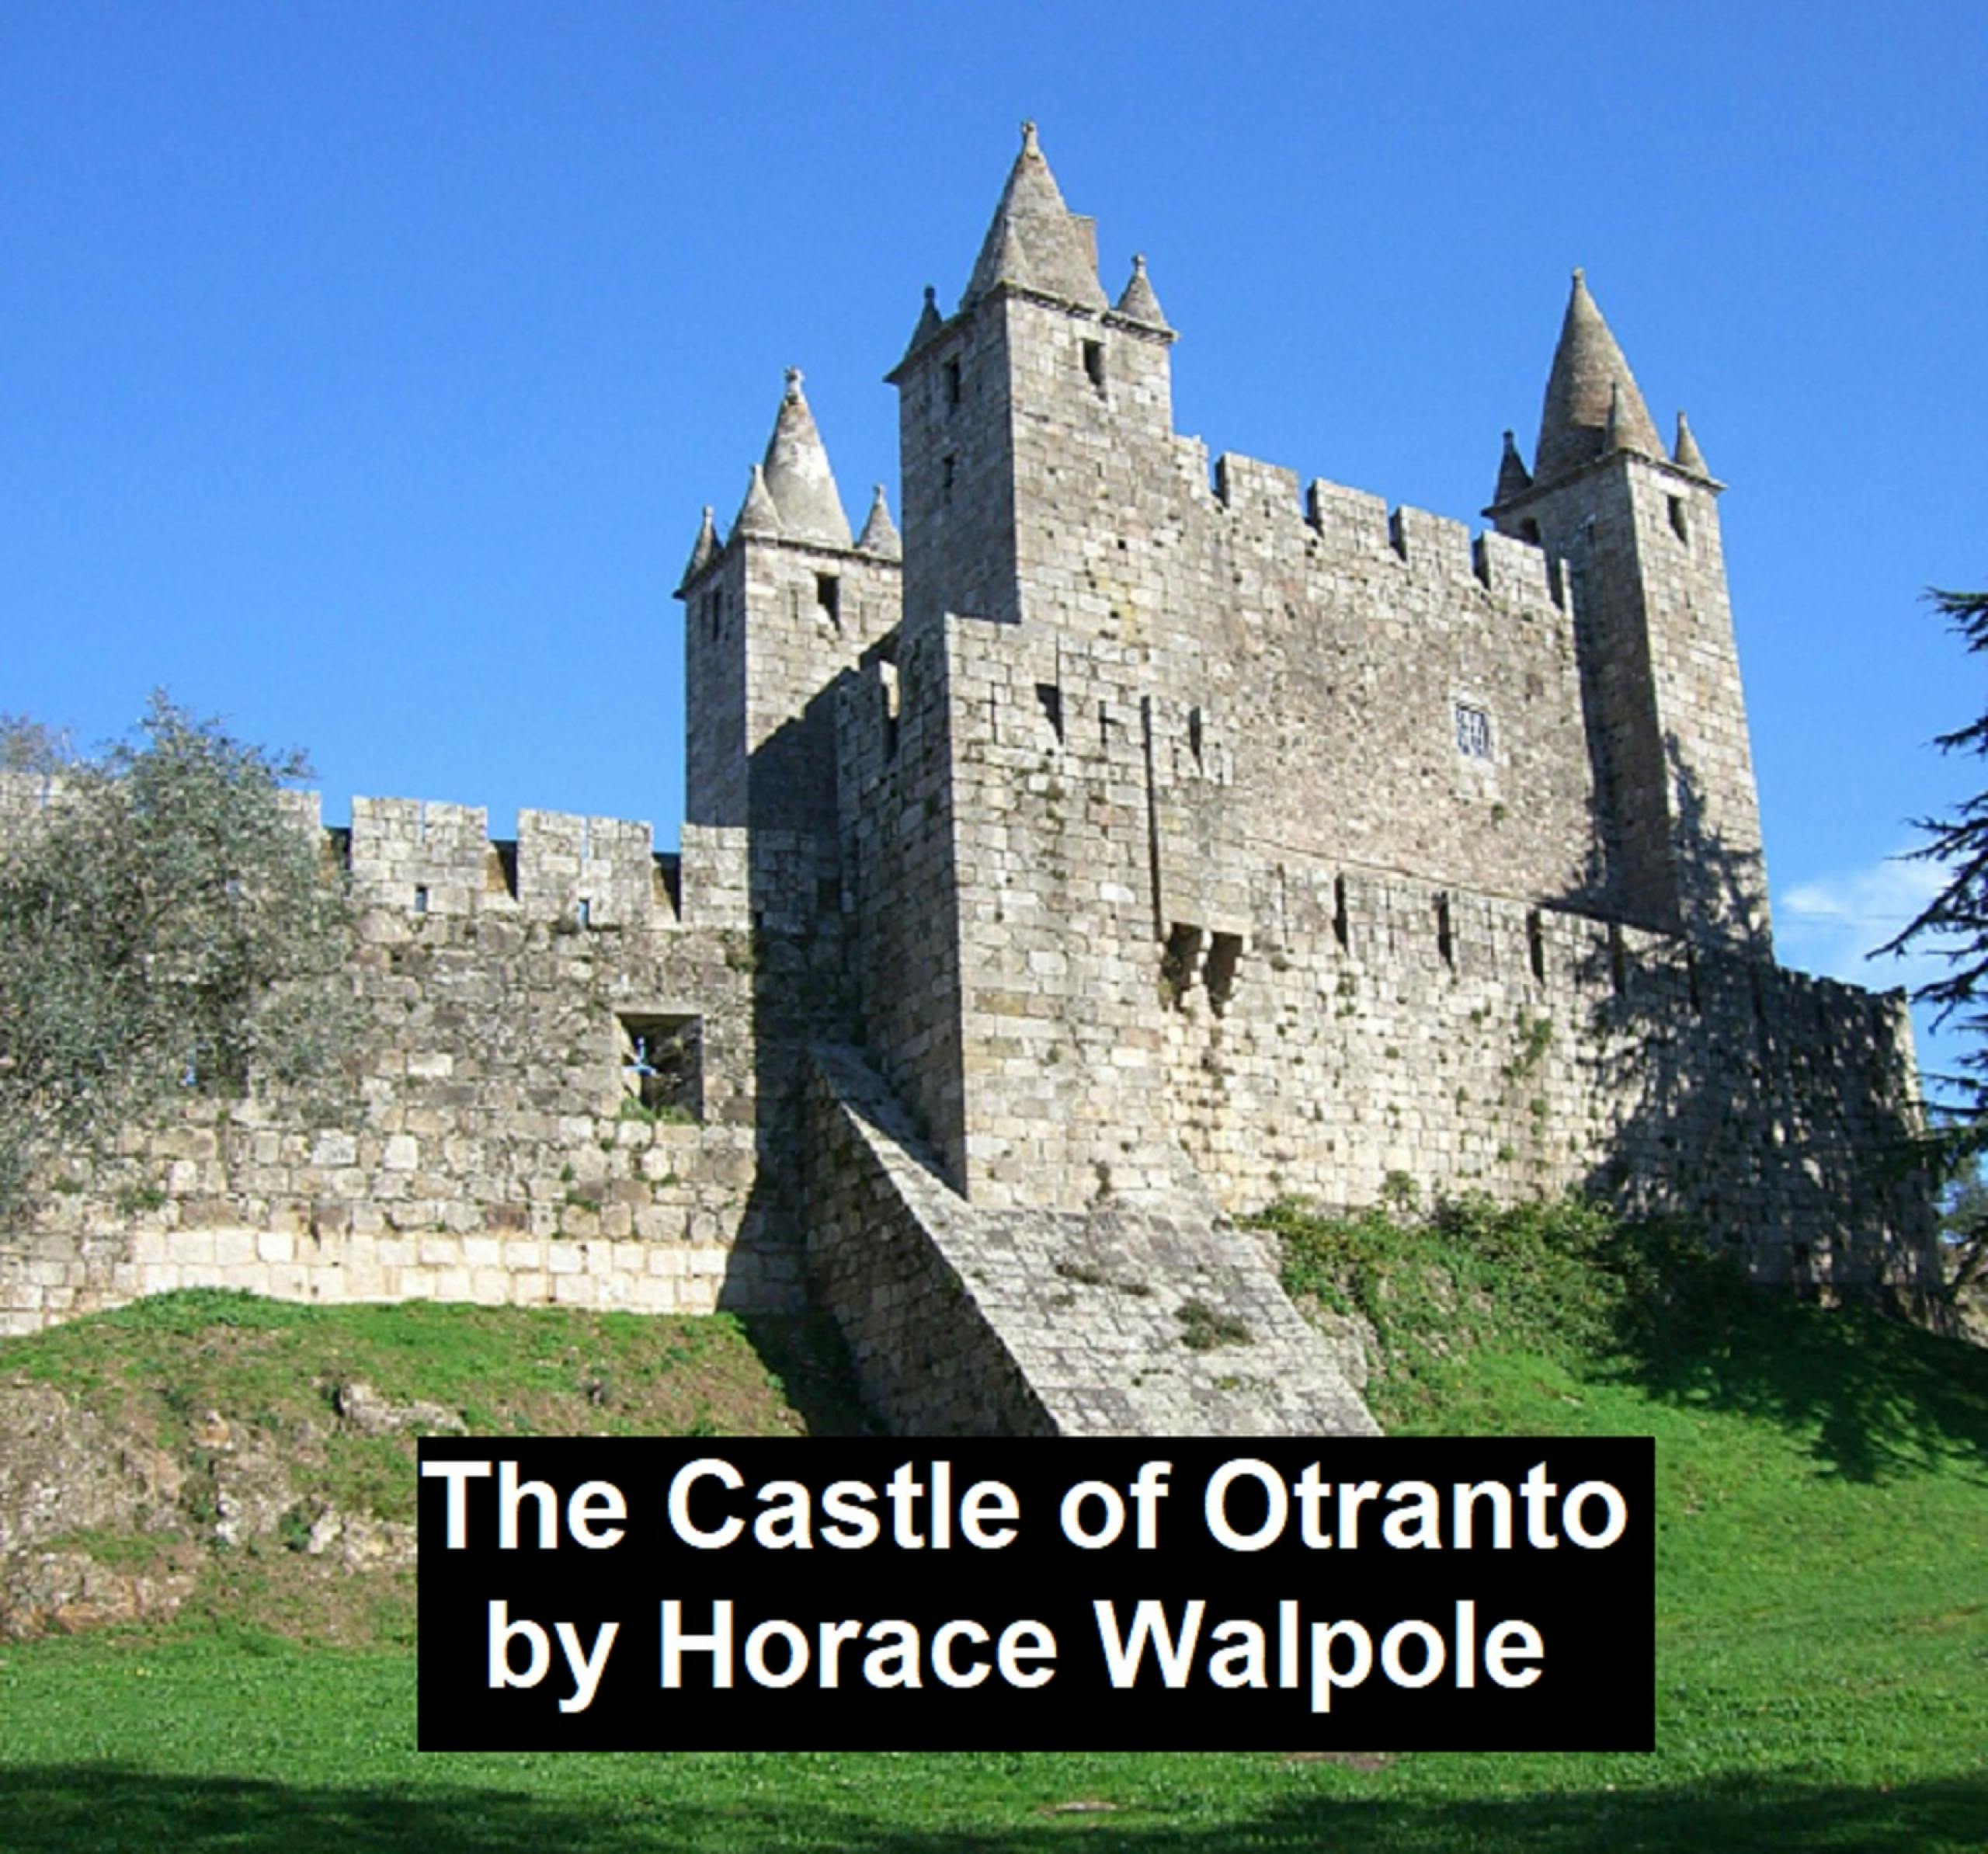 The Castle of Otranto - undefined